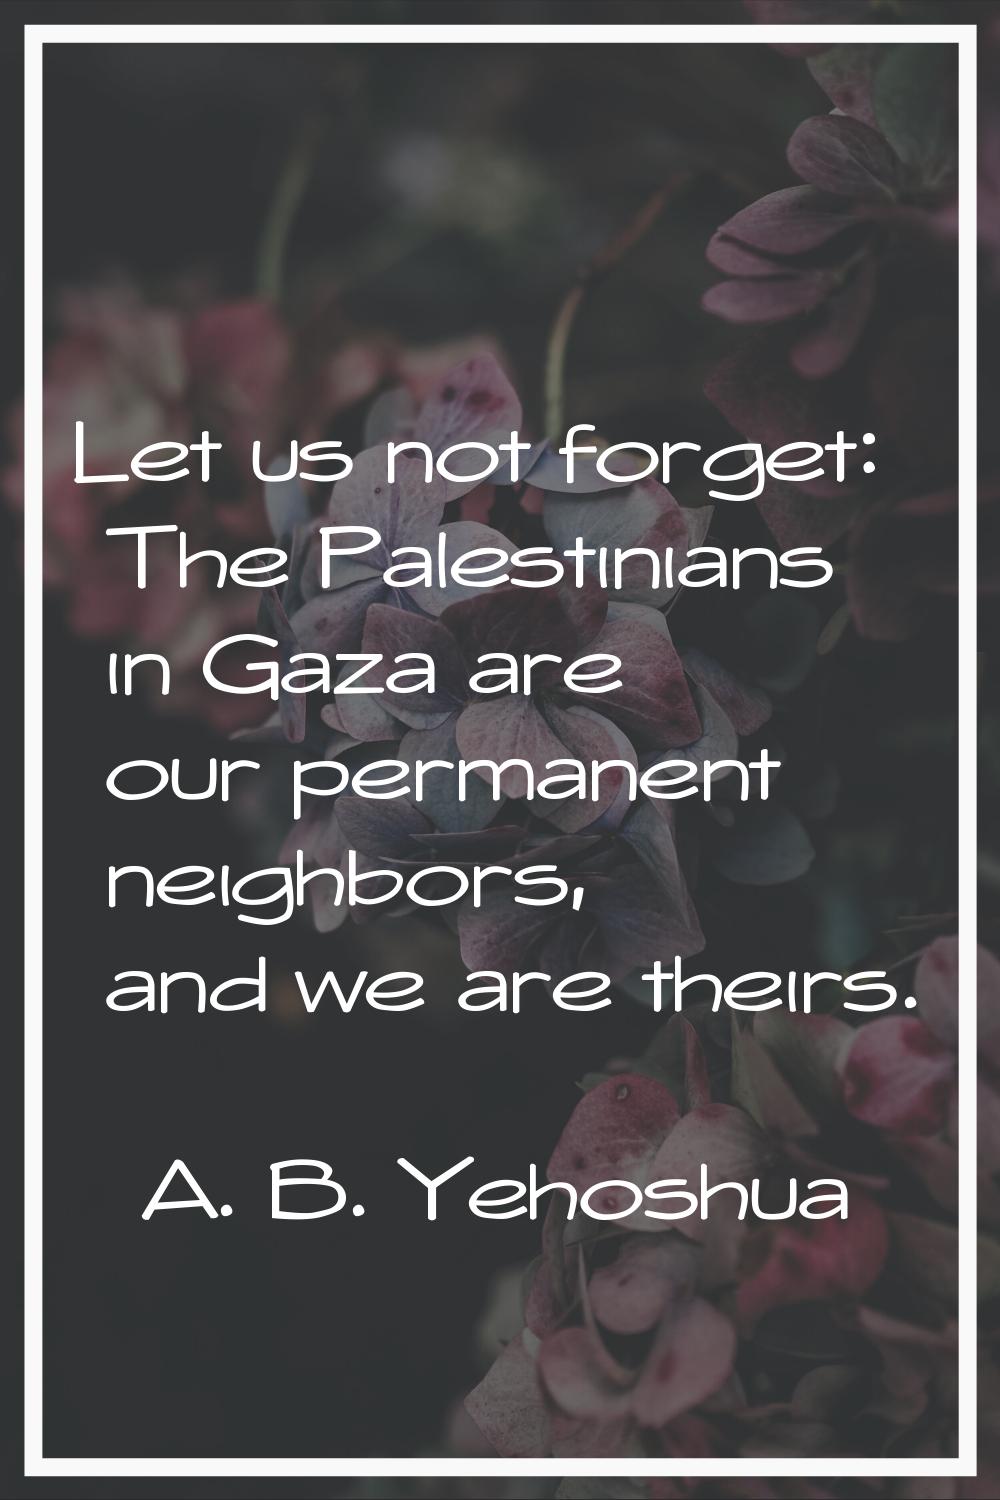 Let us not forget: The Palestinians in Gaza are our permanent neighbors, and we are theirs.